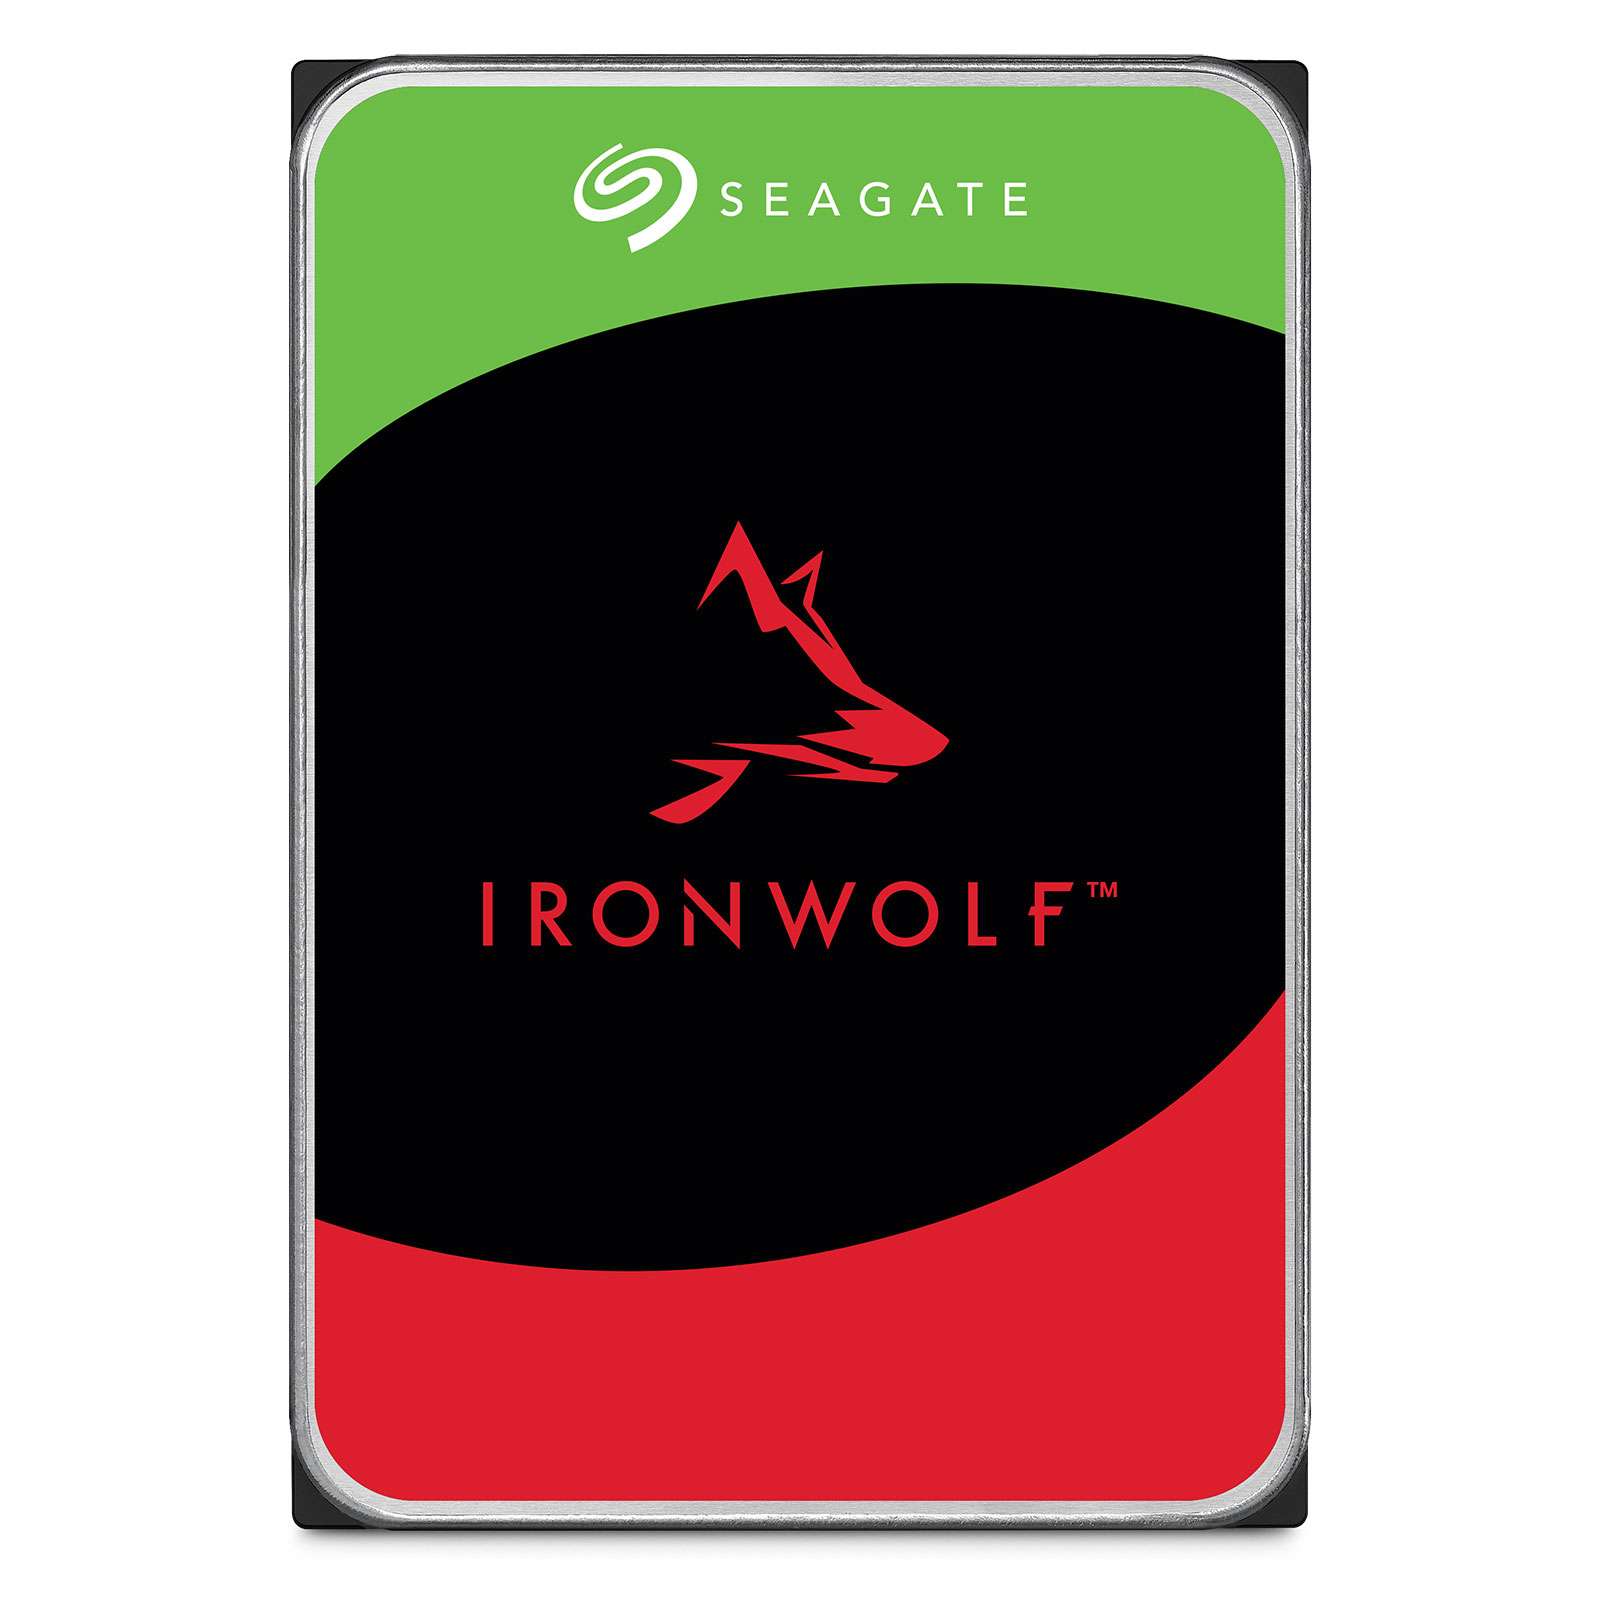 Seagate IronWolf 4 To (ST4000VN006) pas cher - HardWare.fr